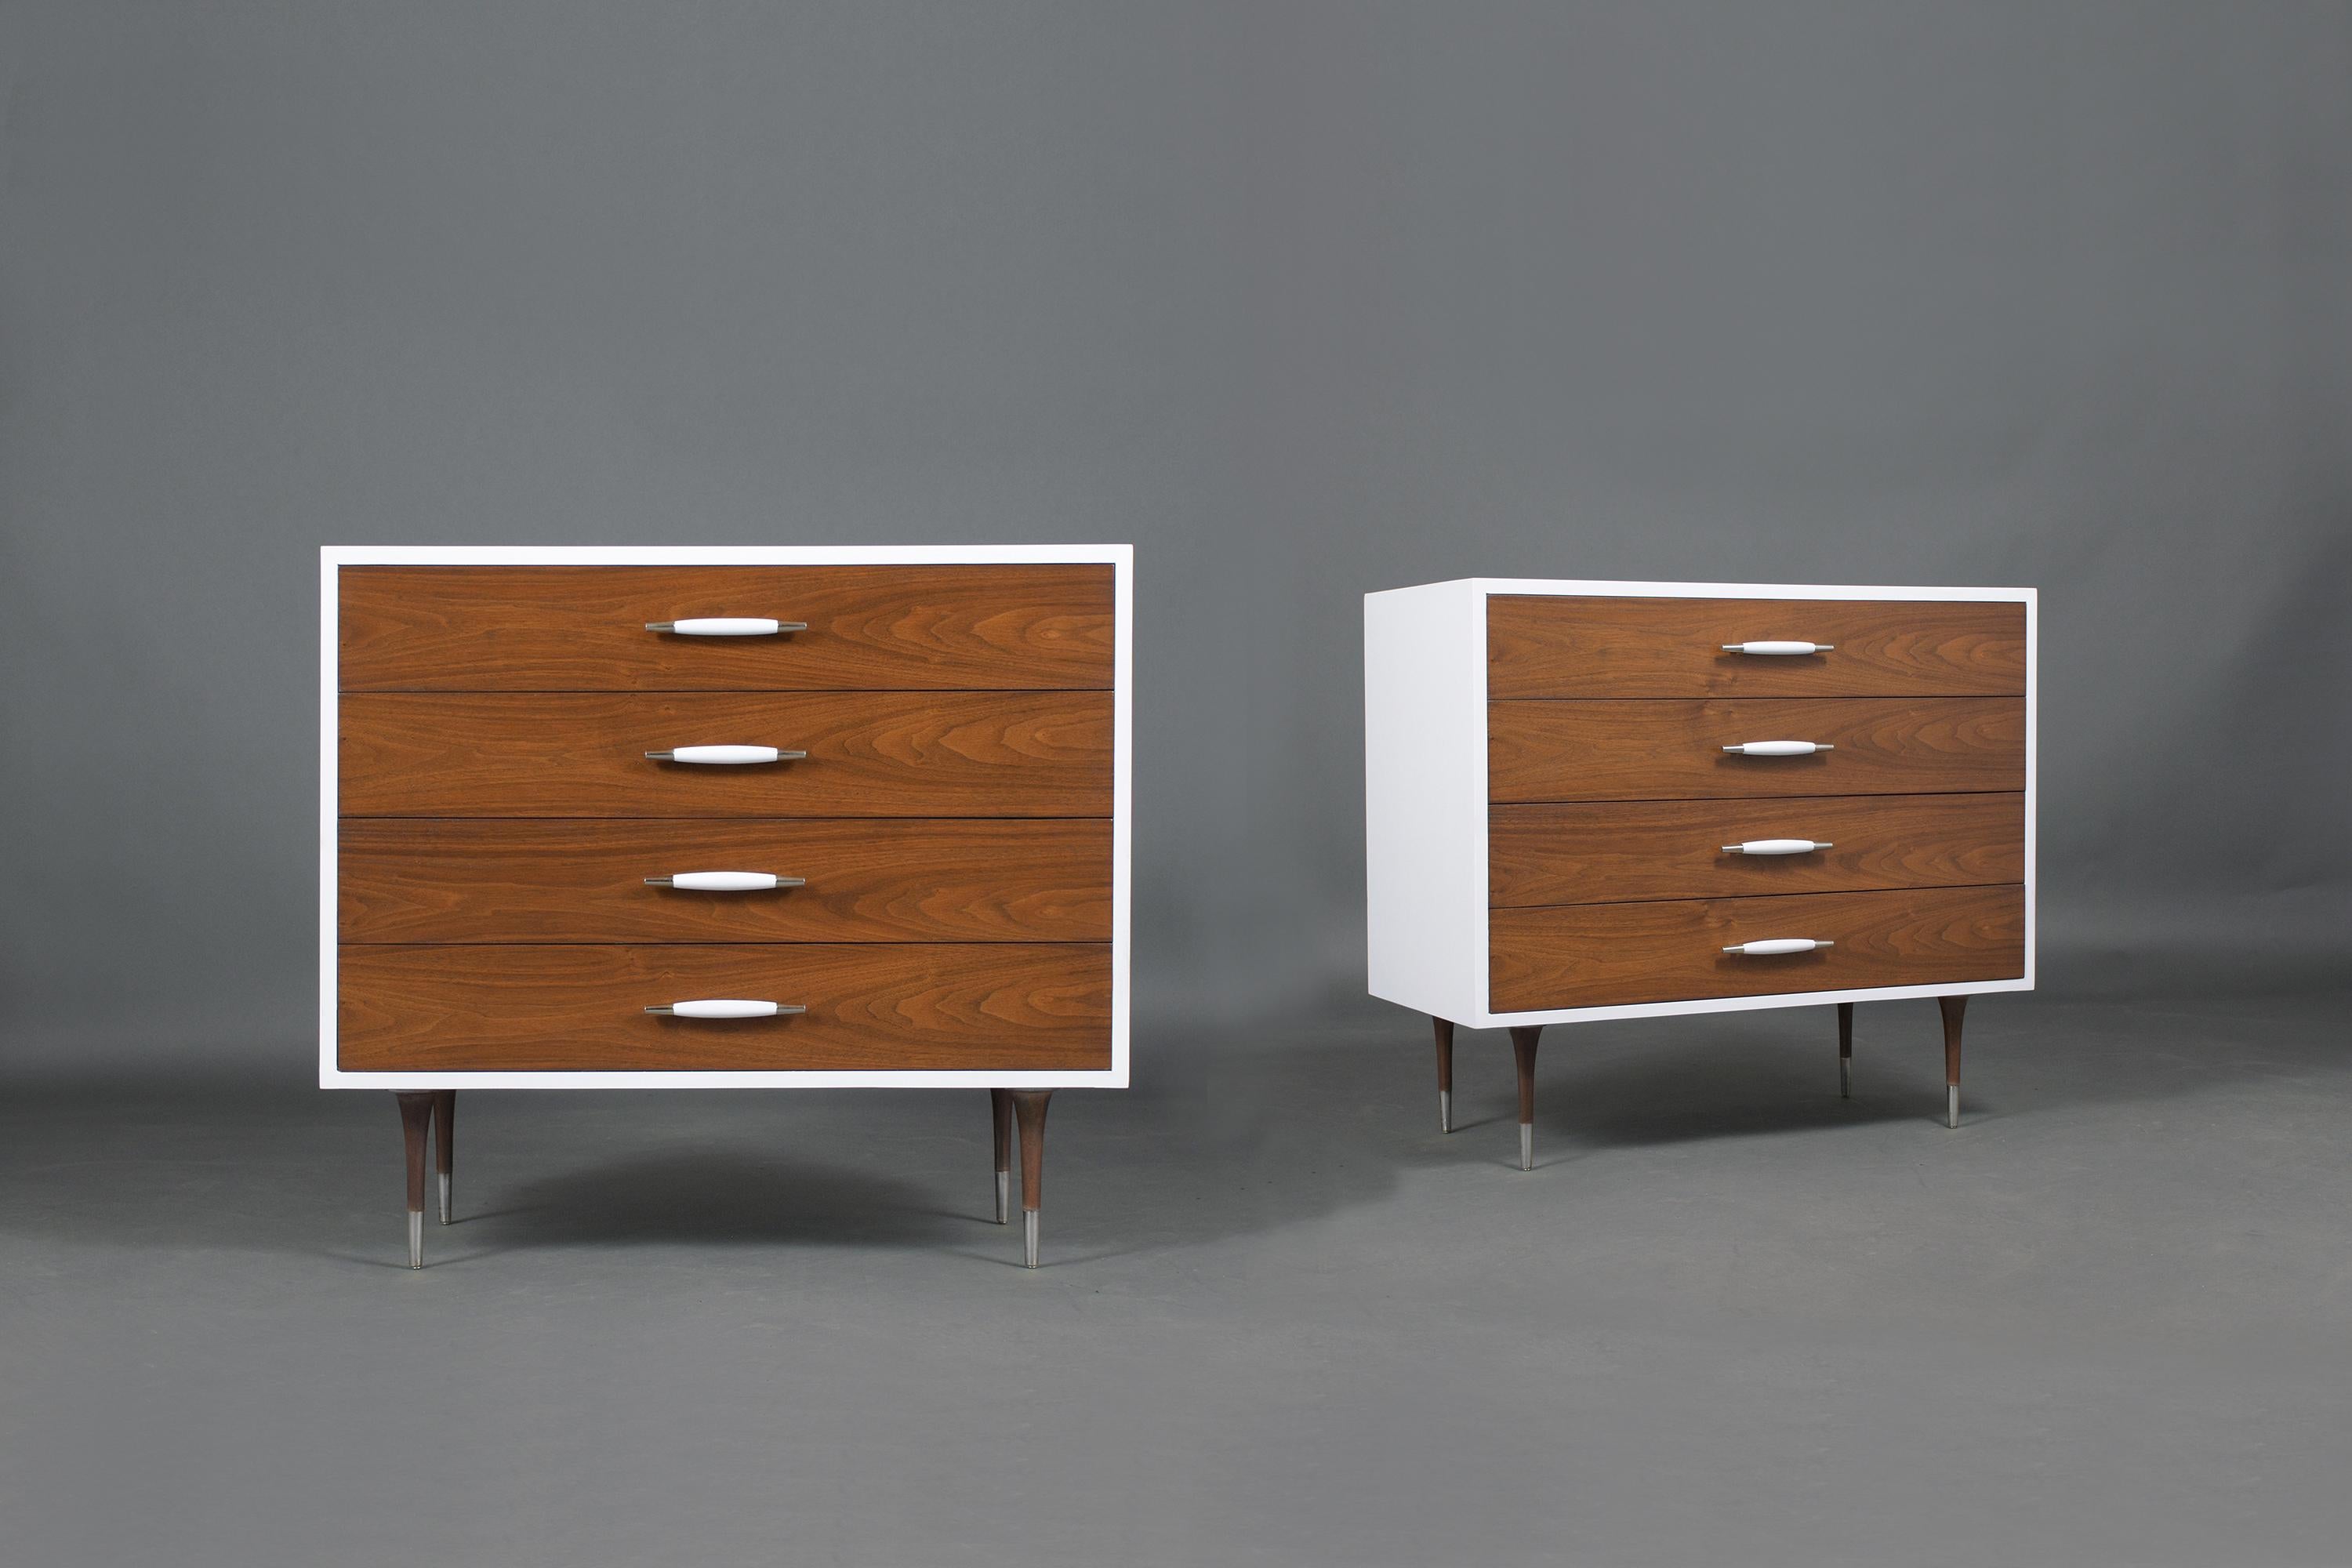 An extraordinary 1960s pair of mid-century dressers crafted out of wood professionally restored by our craftsmen. These pieces feature a new eye-catching white and walnut color combination with a lacquered finish. This fabulous vintage set of chests